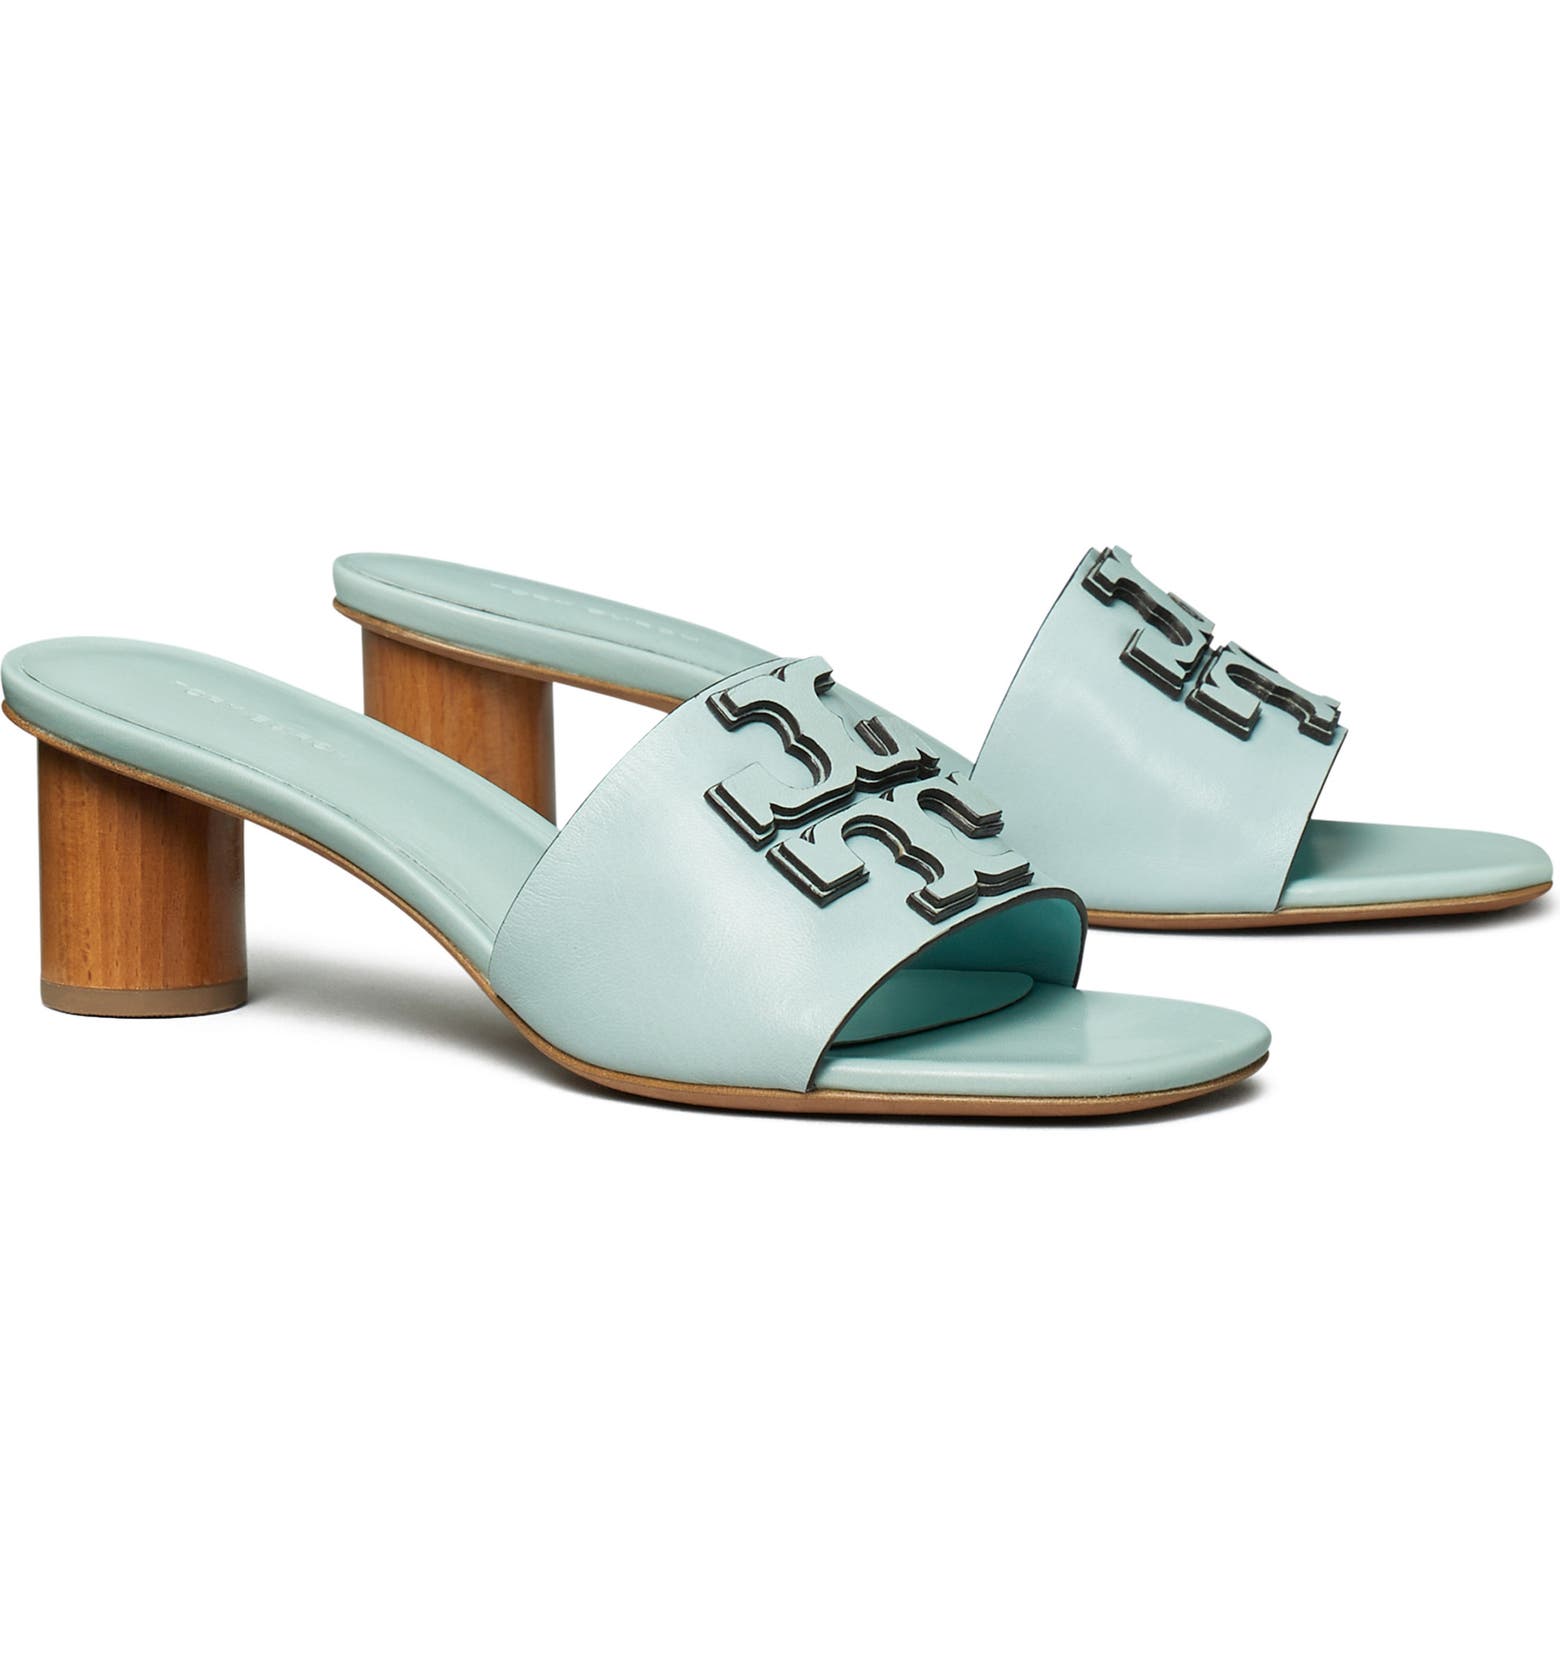 The 9 Best Shoe Colors To Wear With Any Light Blue Dress